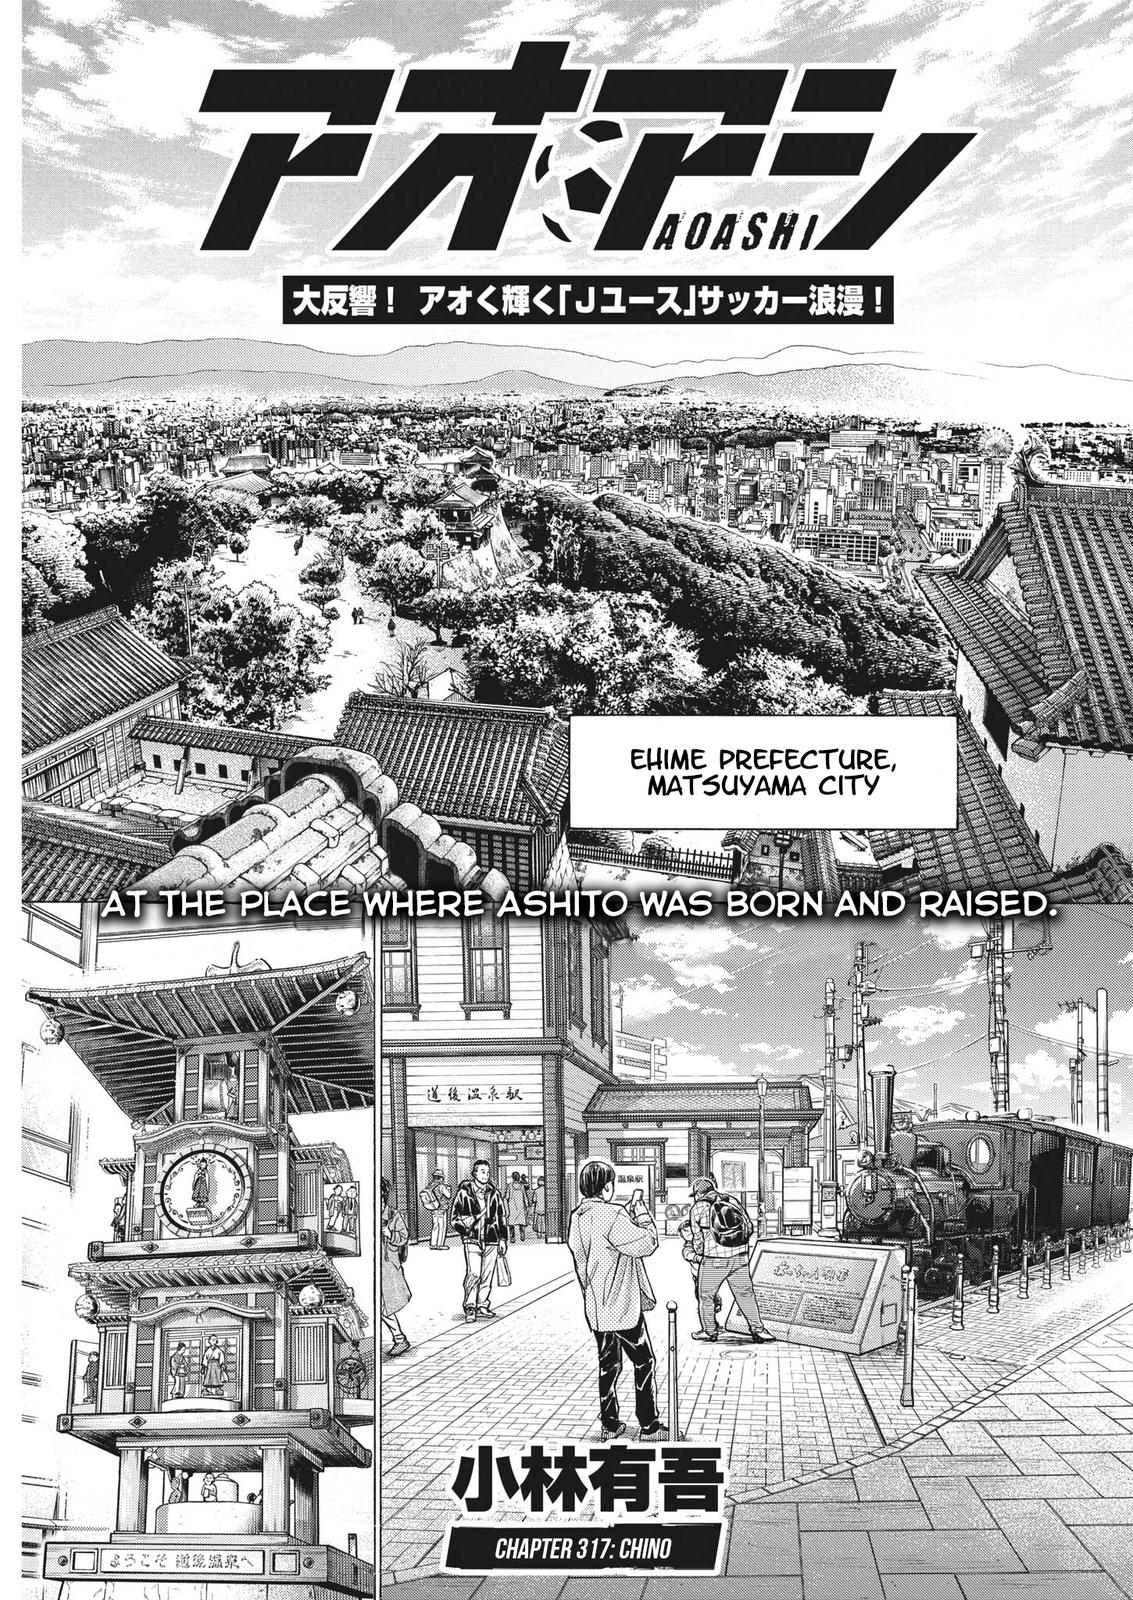 Ao Ashi, Chapter 36  TcbScans Org - Free Manga Online in High Quality